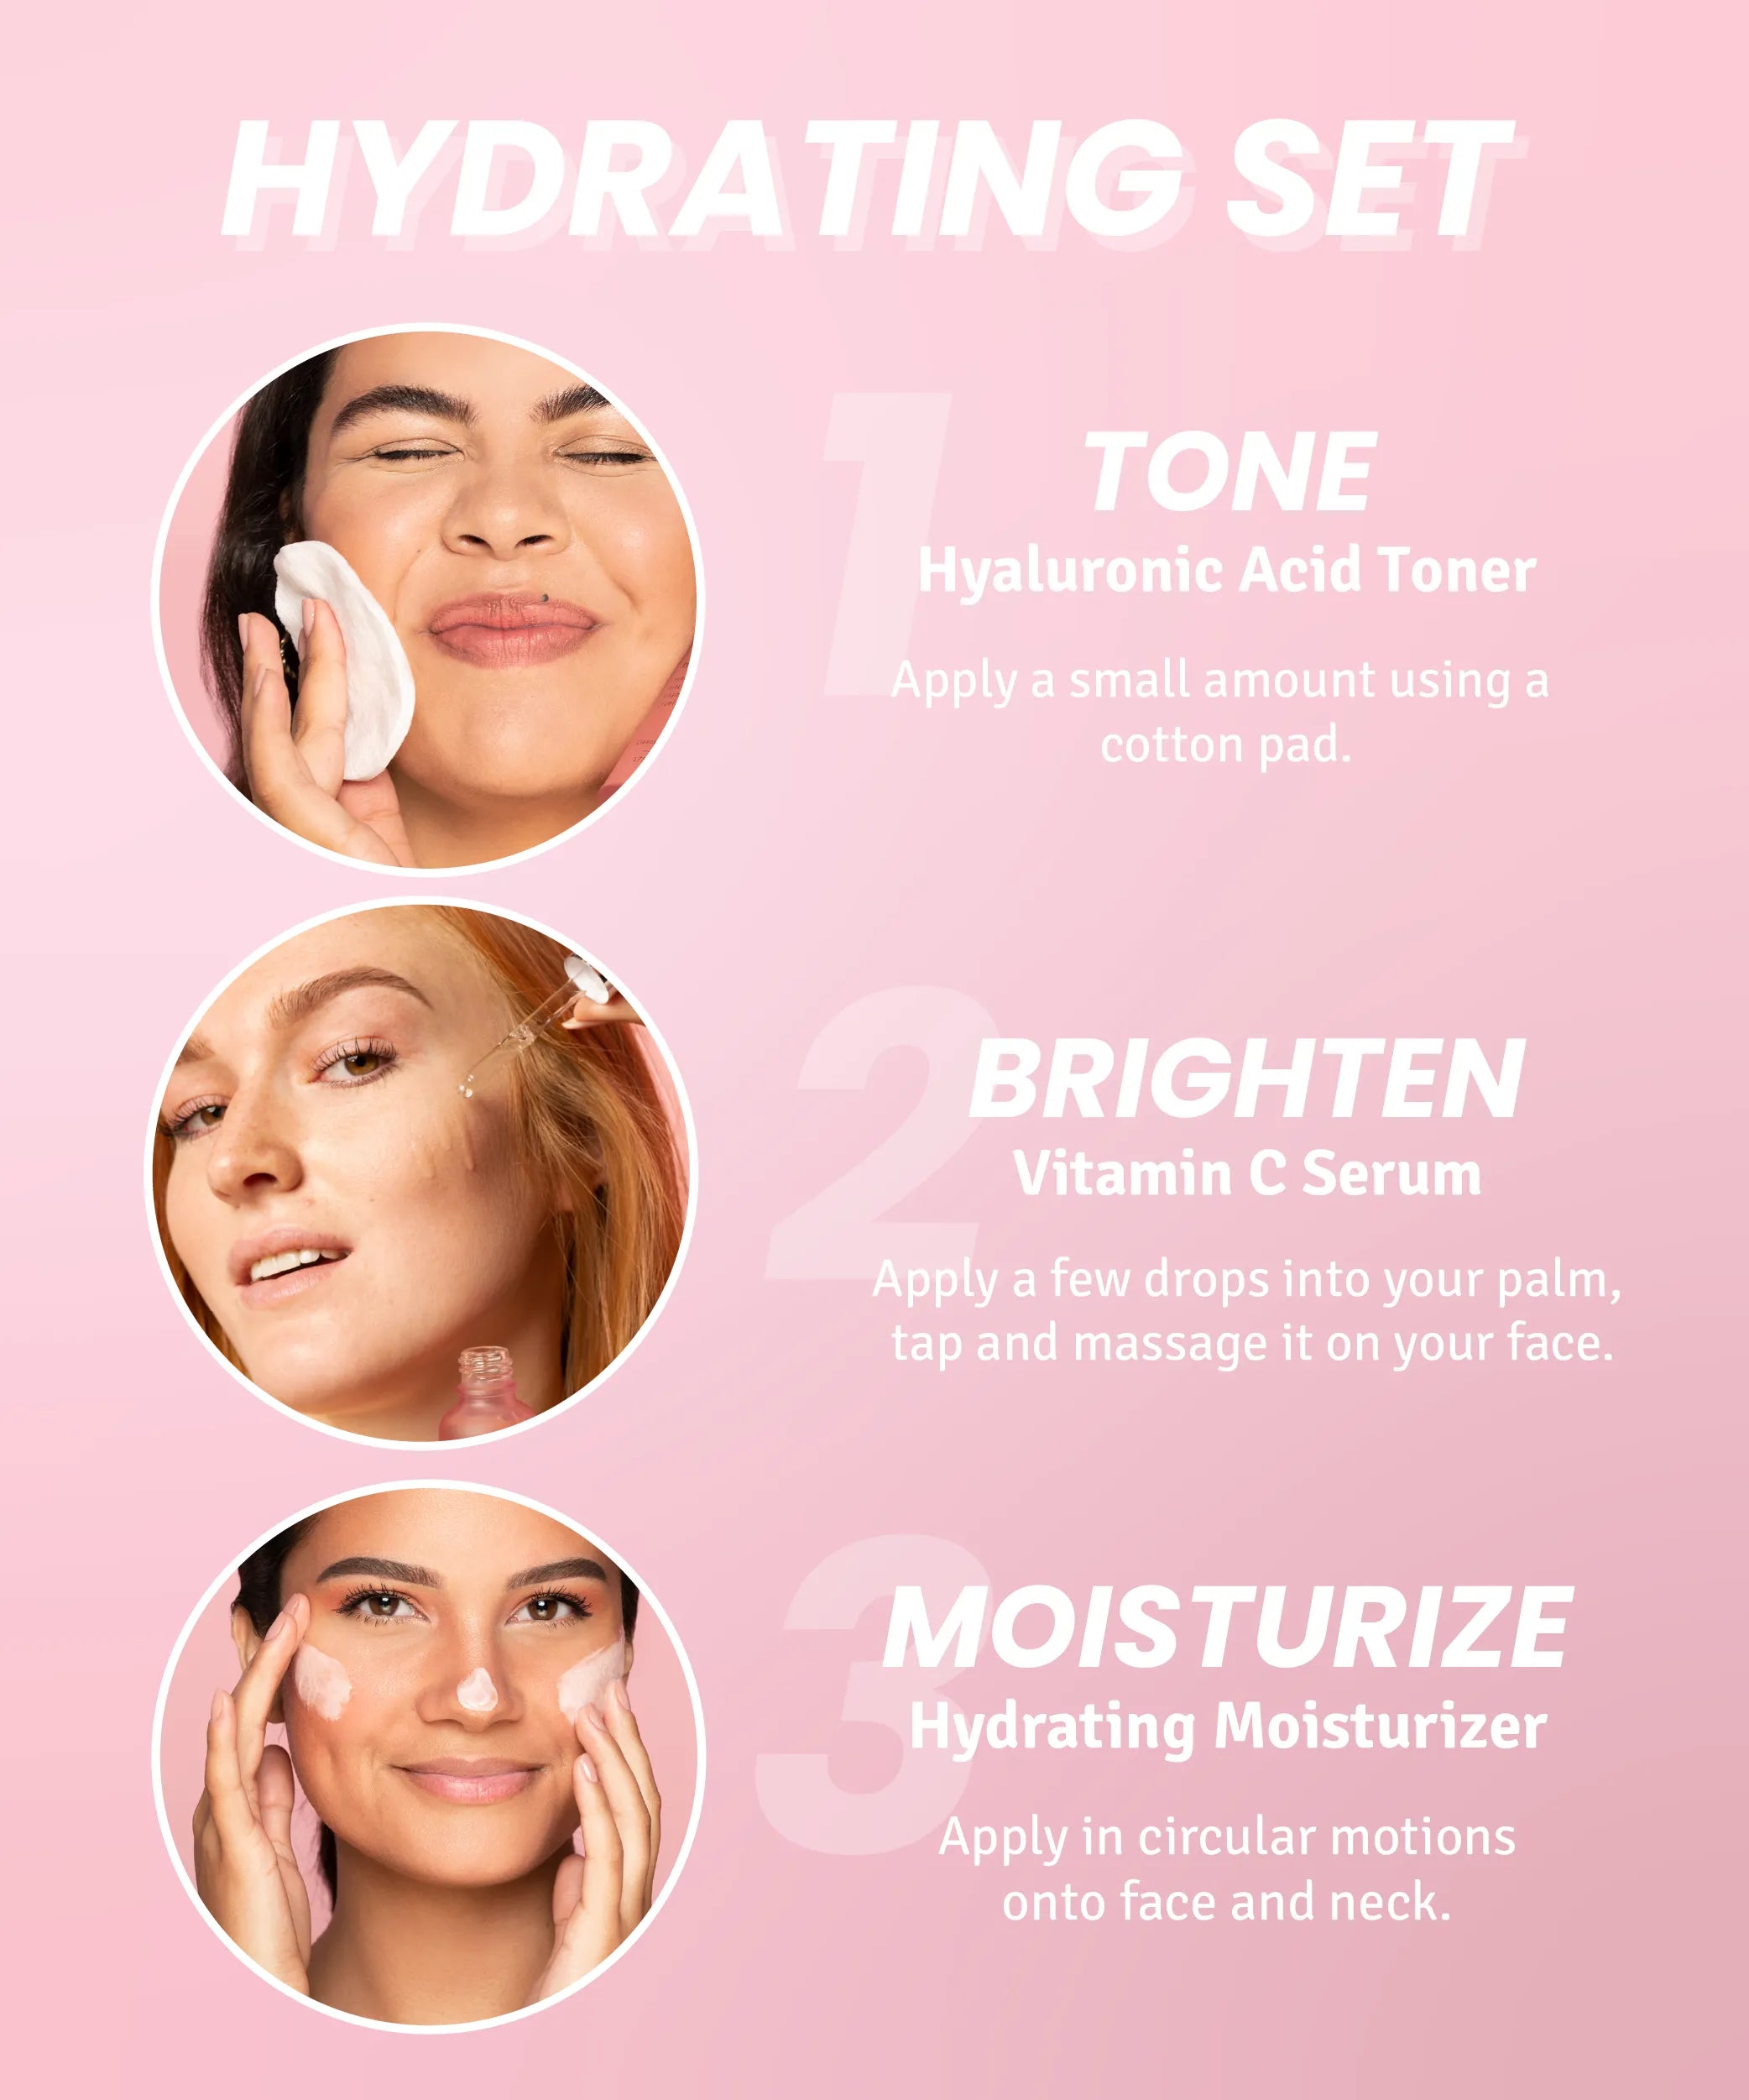 The Hydrating Set